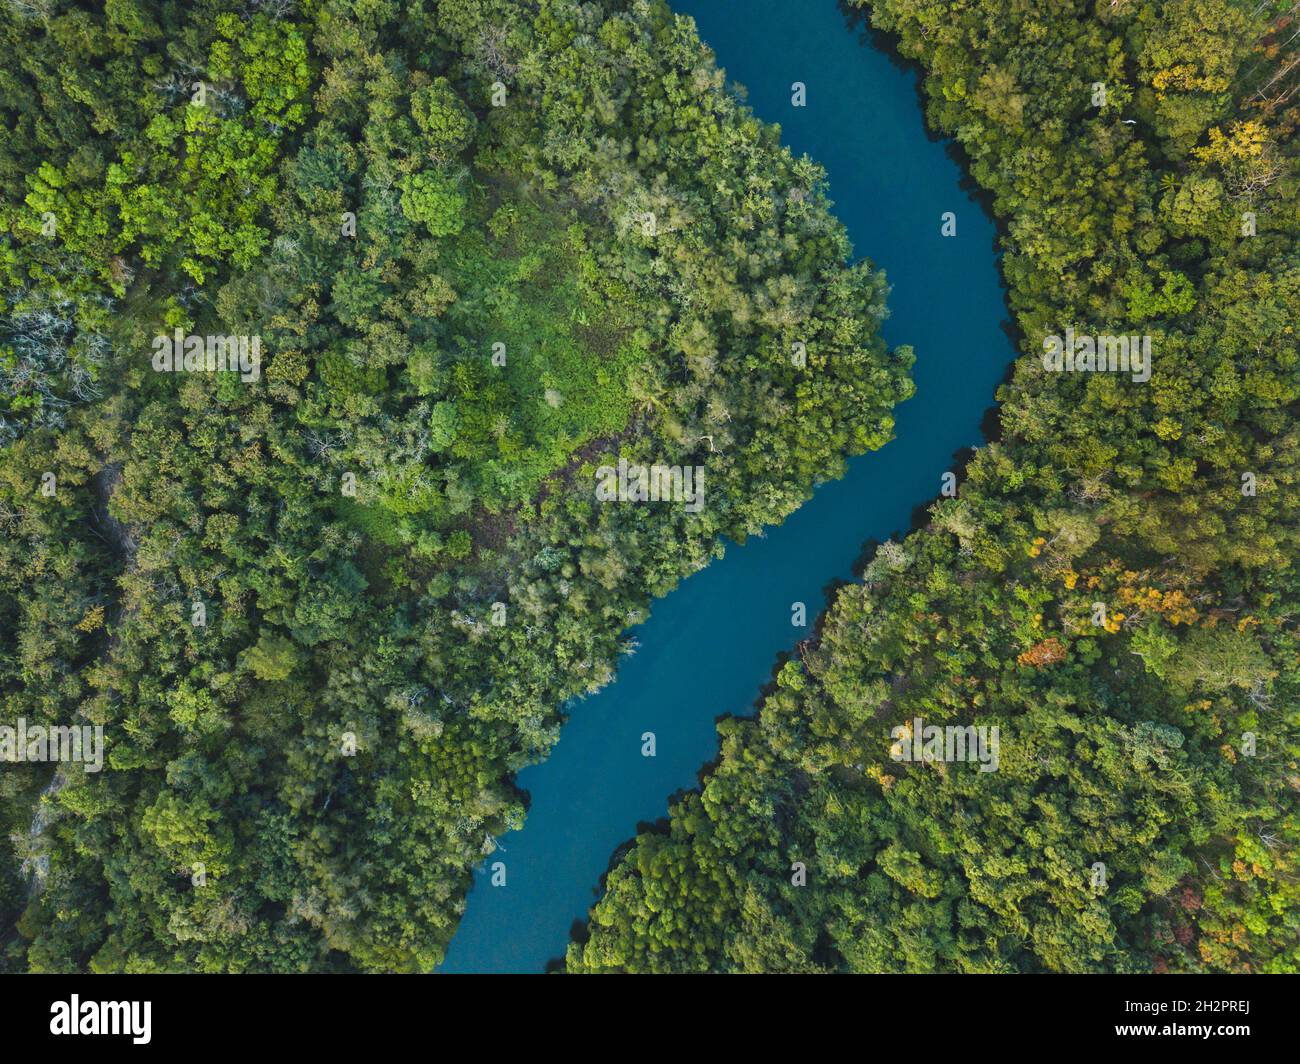 jungle forest aerial landscape, winding river view from above, nature and wilderness Stock Photo